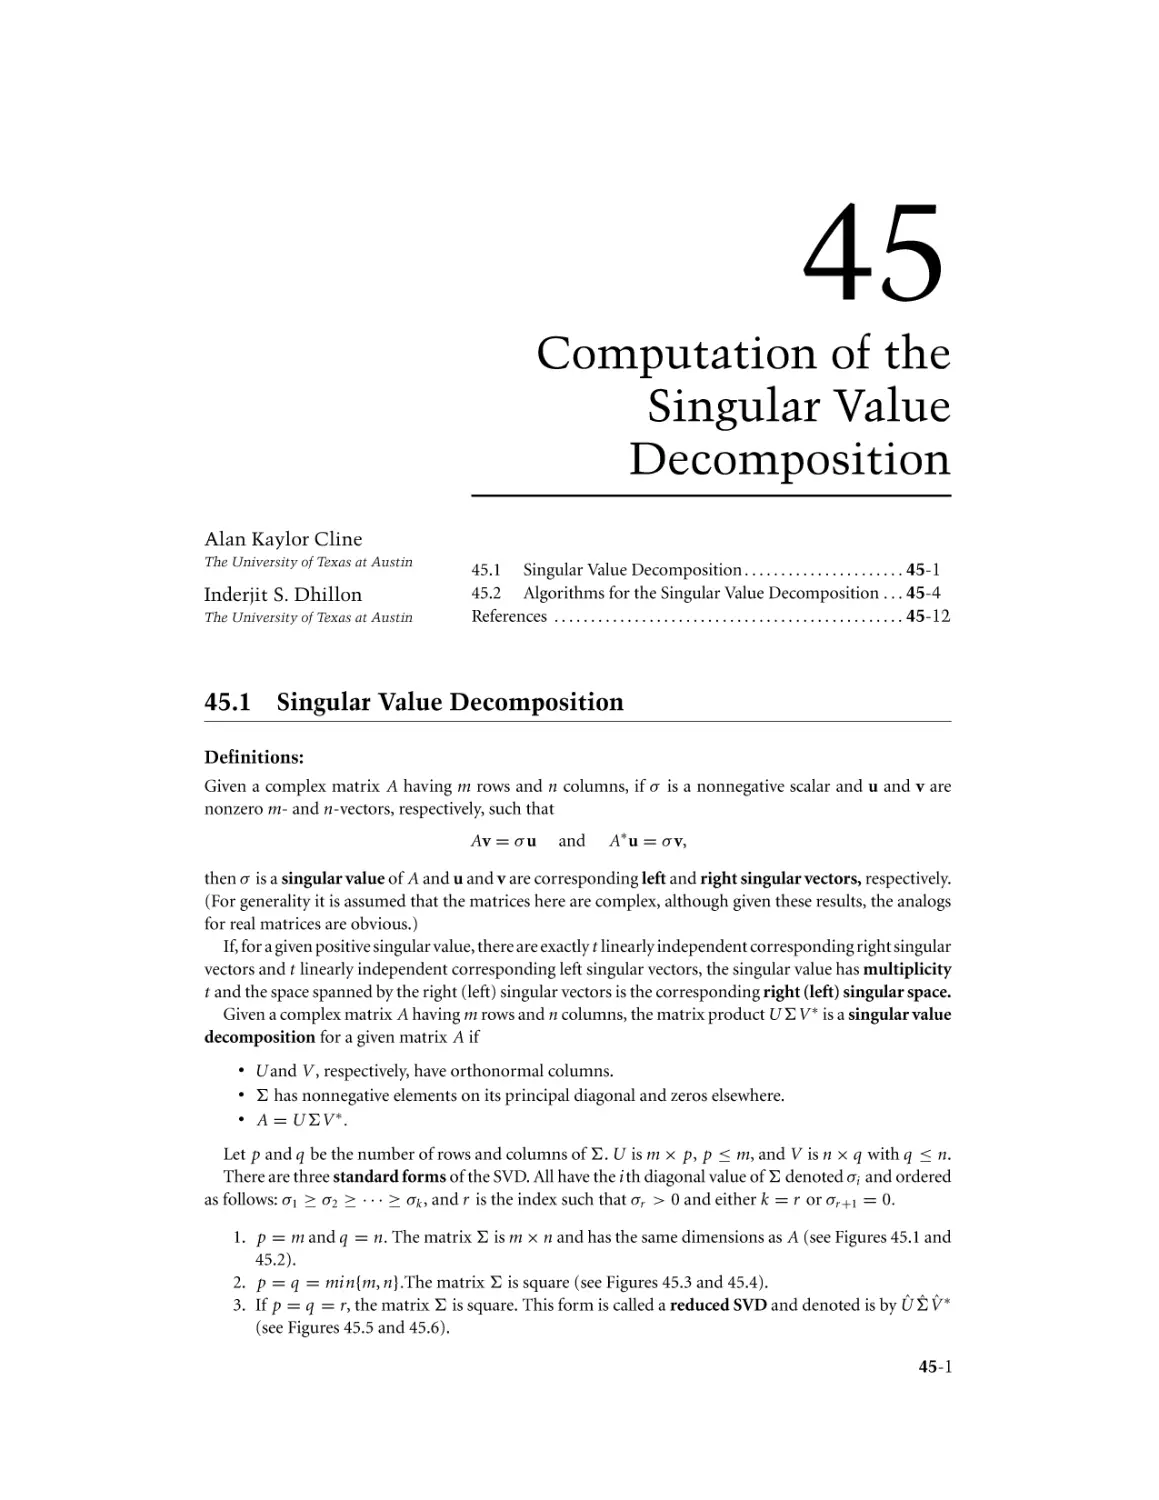 Chapter 45. Computation of the Singular Value Decomposition